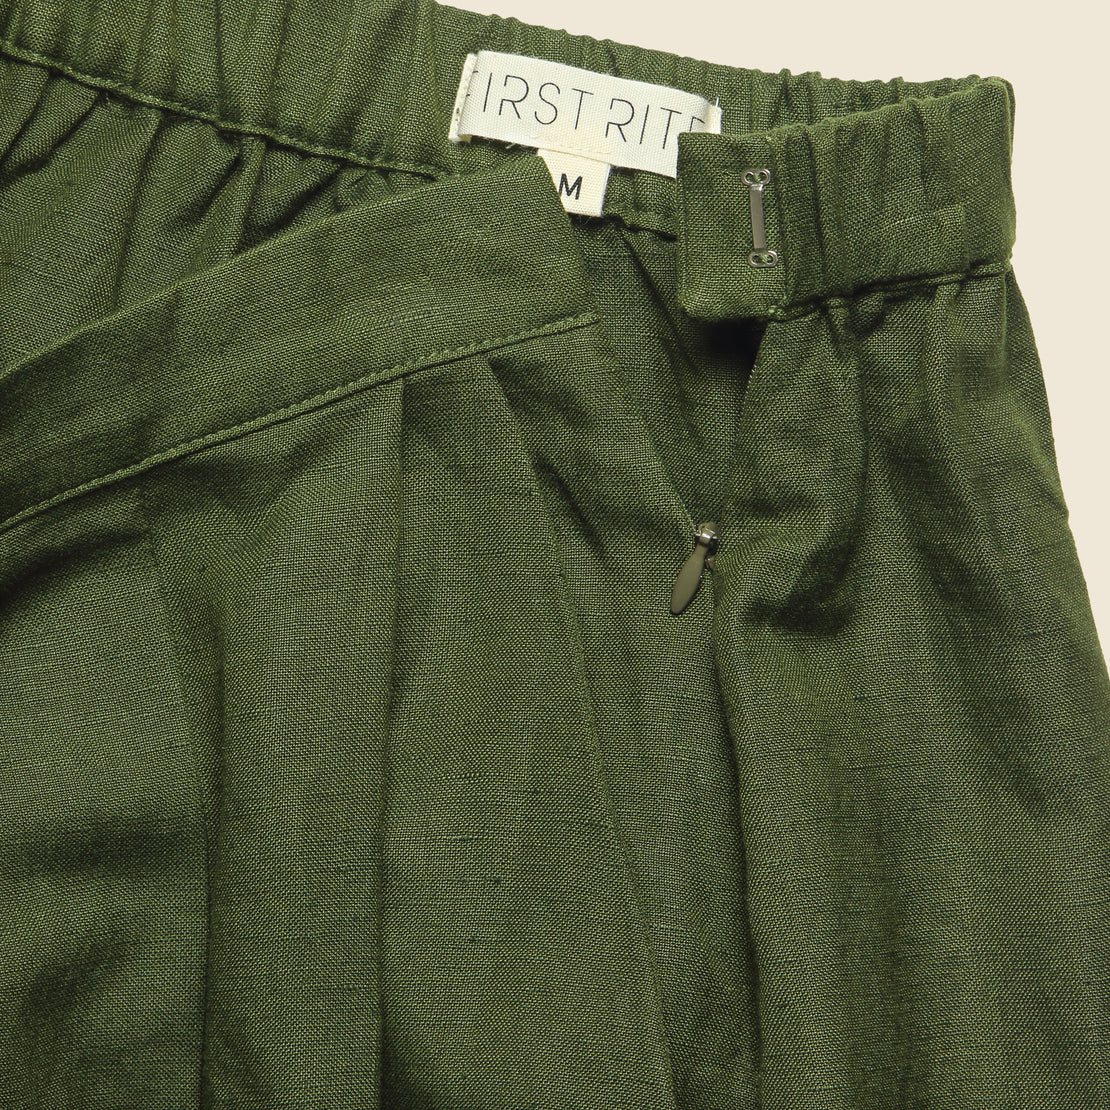 Pleated Skirt - Moss - First Rite - STAG Provisions - W - Onepiece - Skirt